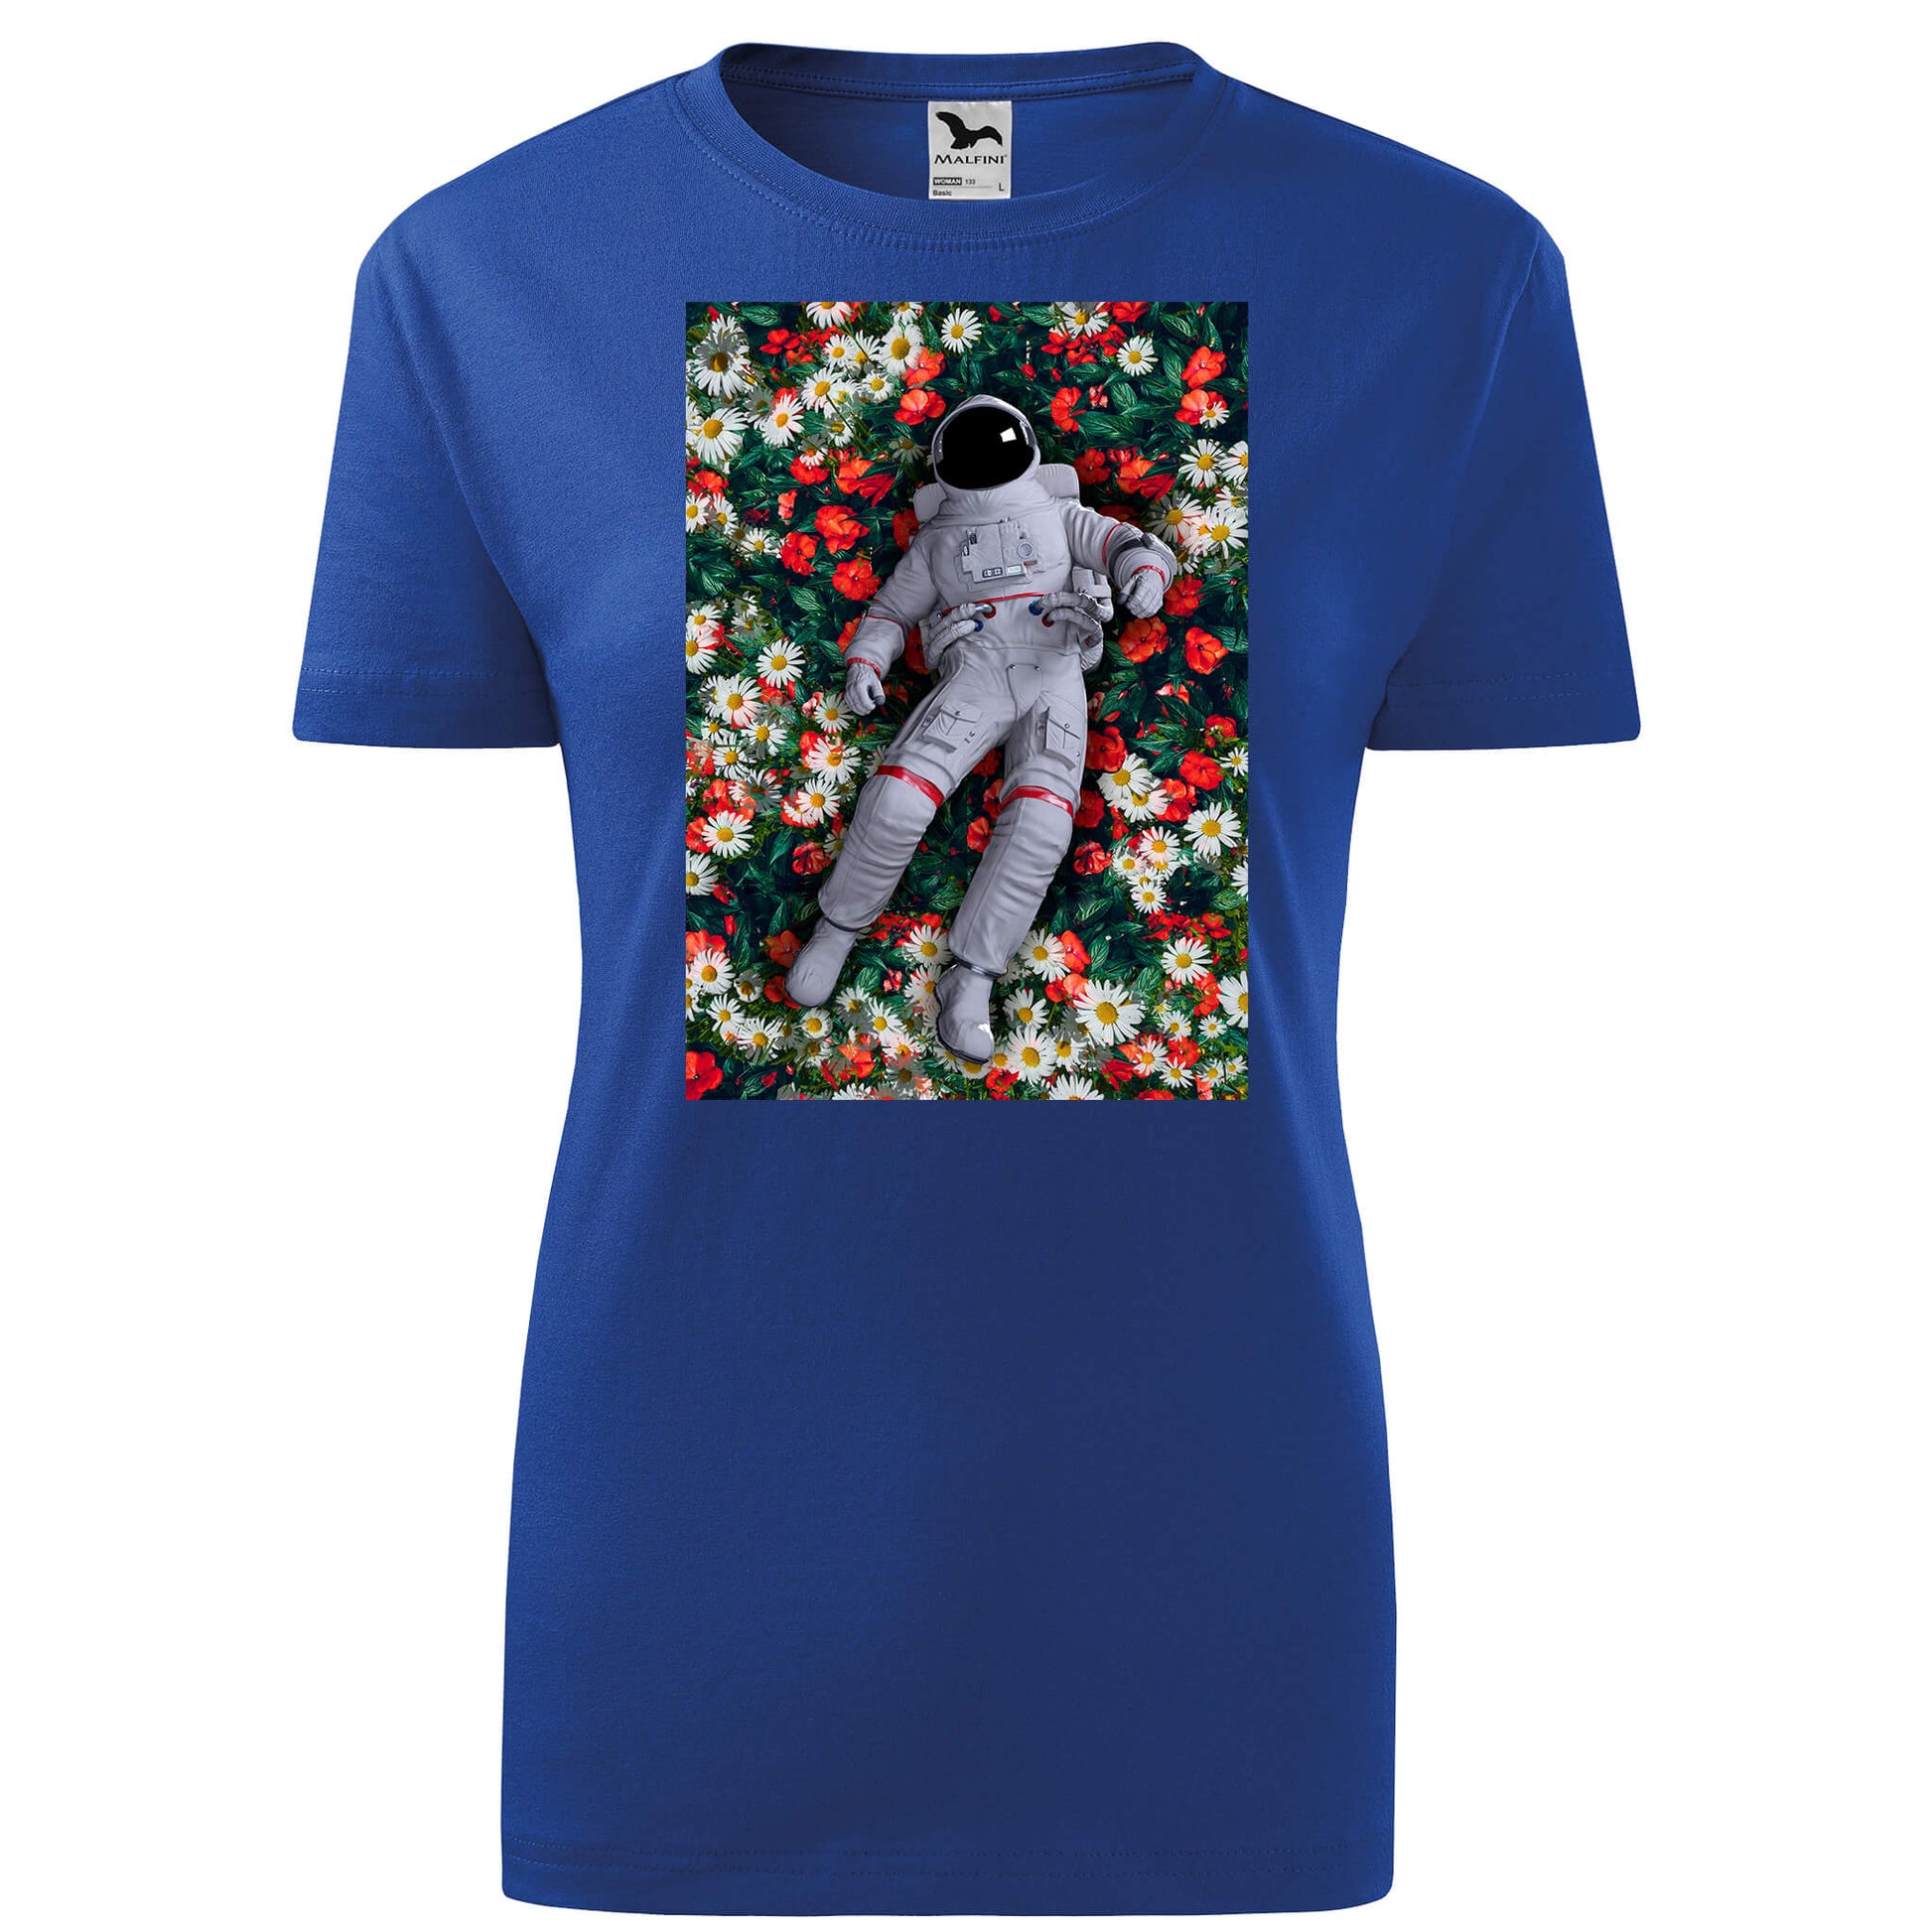 Astronaut laying in flowers t-shirt - rvdesignprint